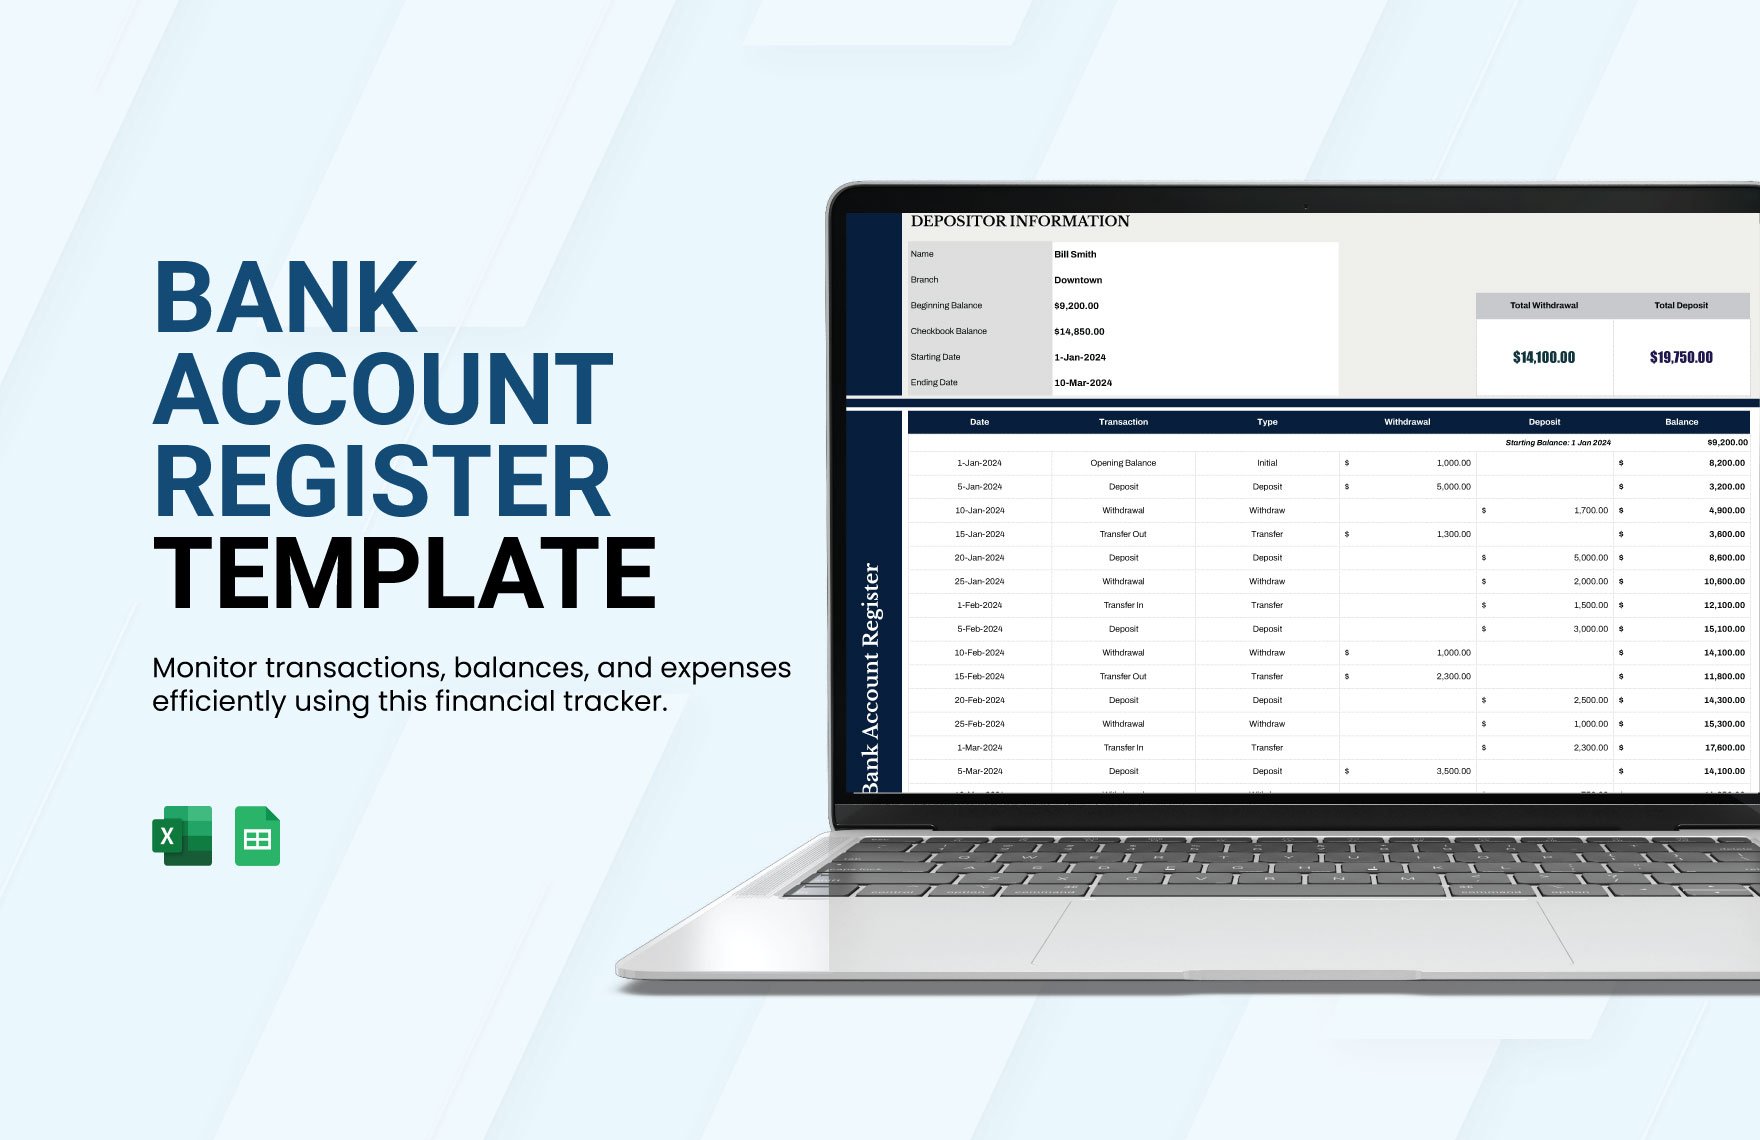 Bank Account Register Template